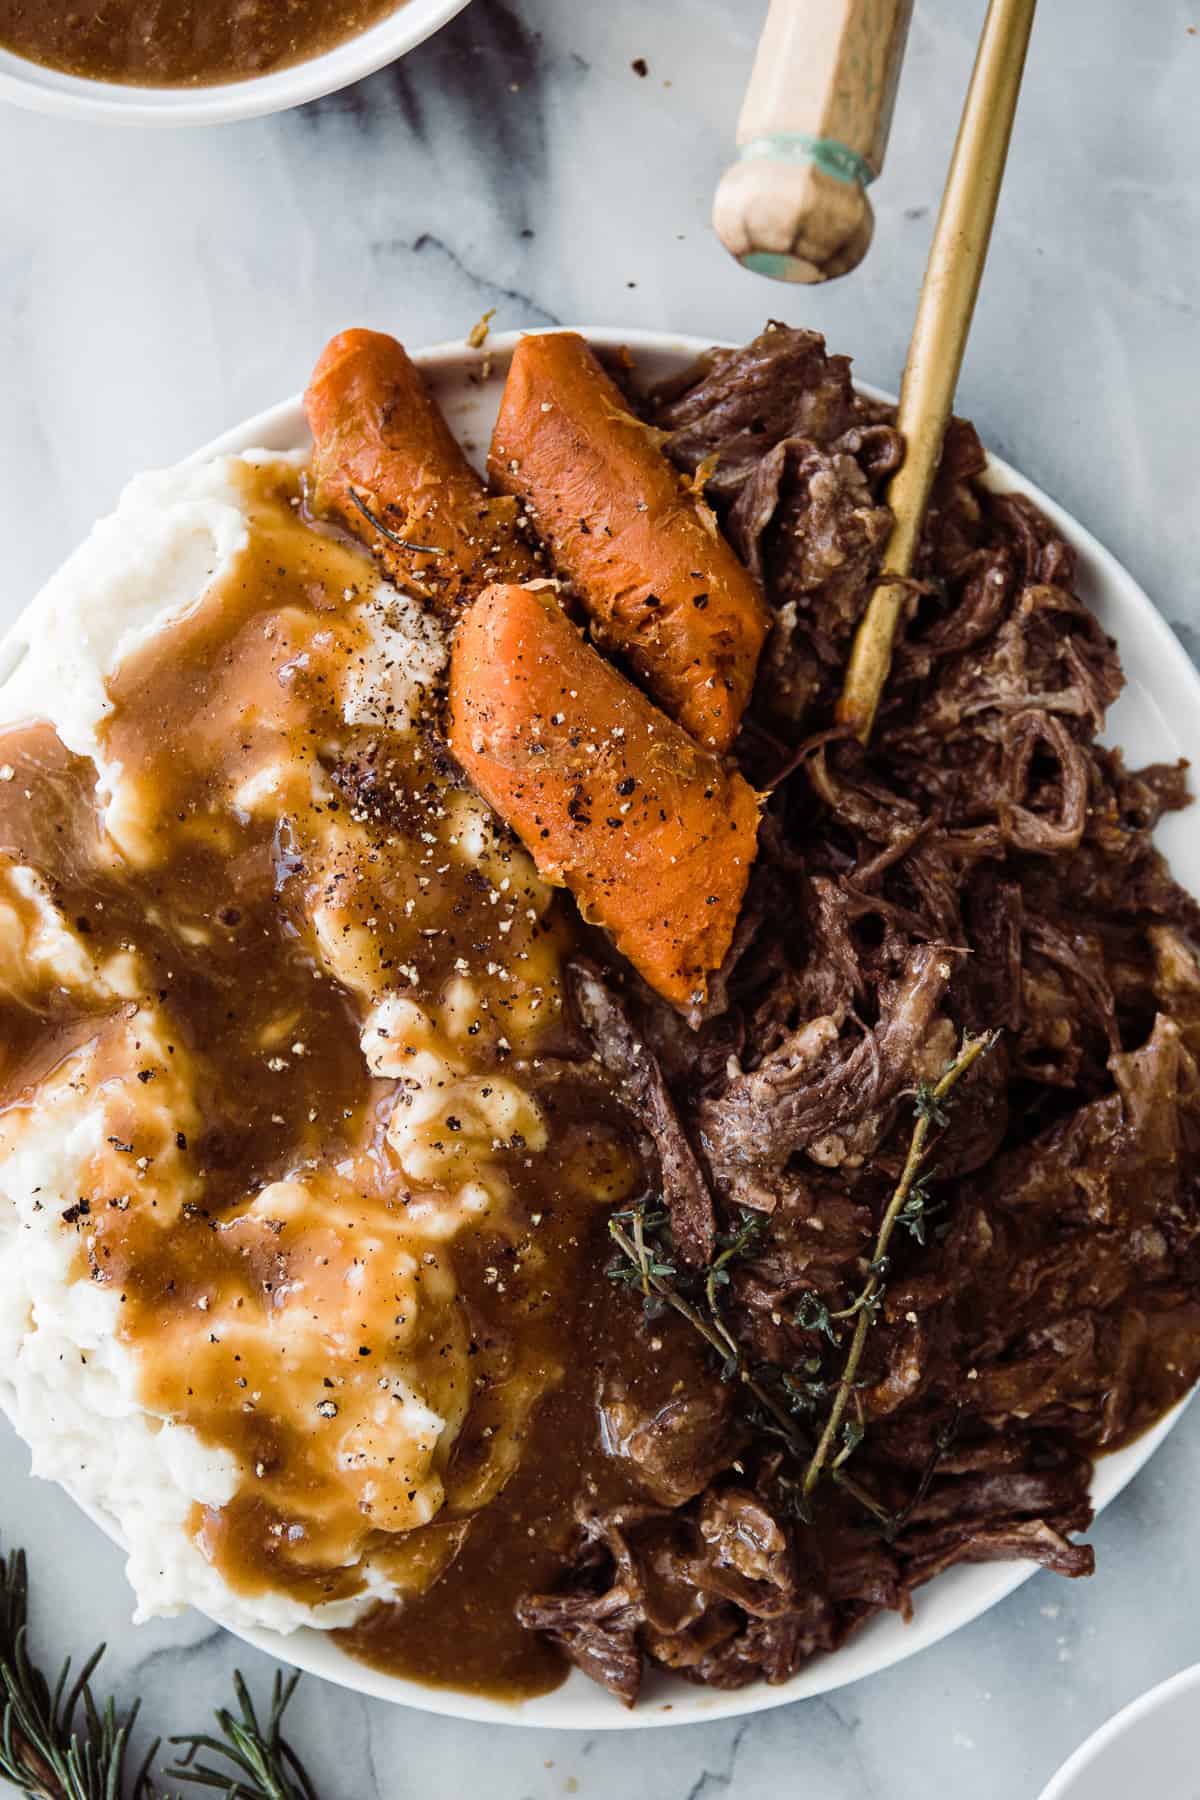 Bowl of instant pot roast beef served with mashed potatoes and carrots.